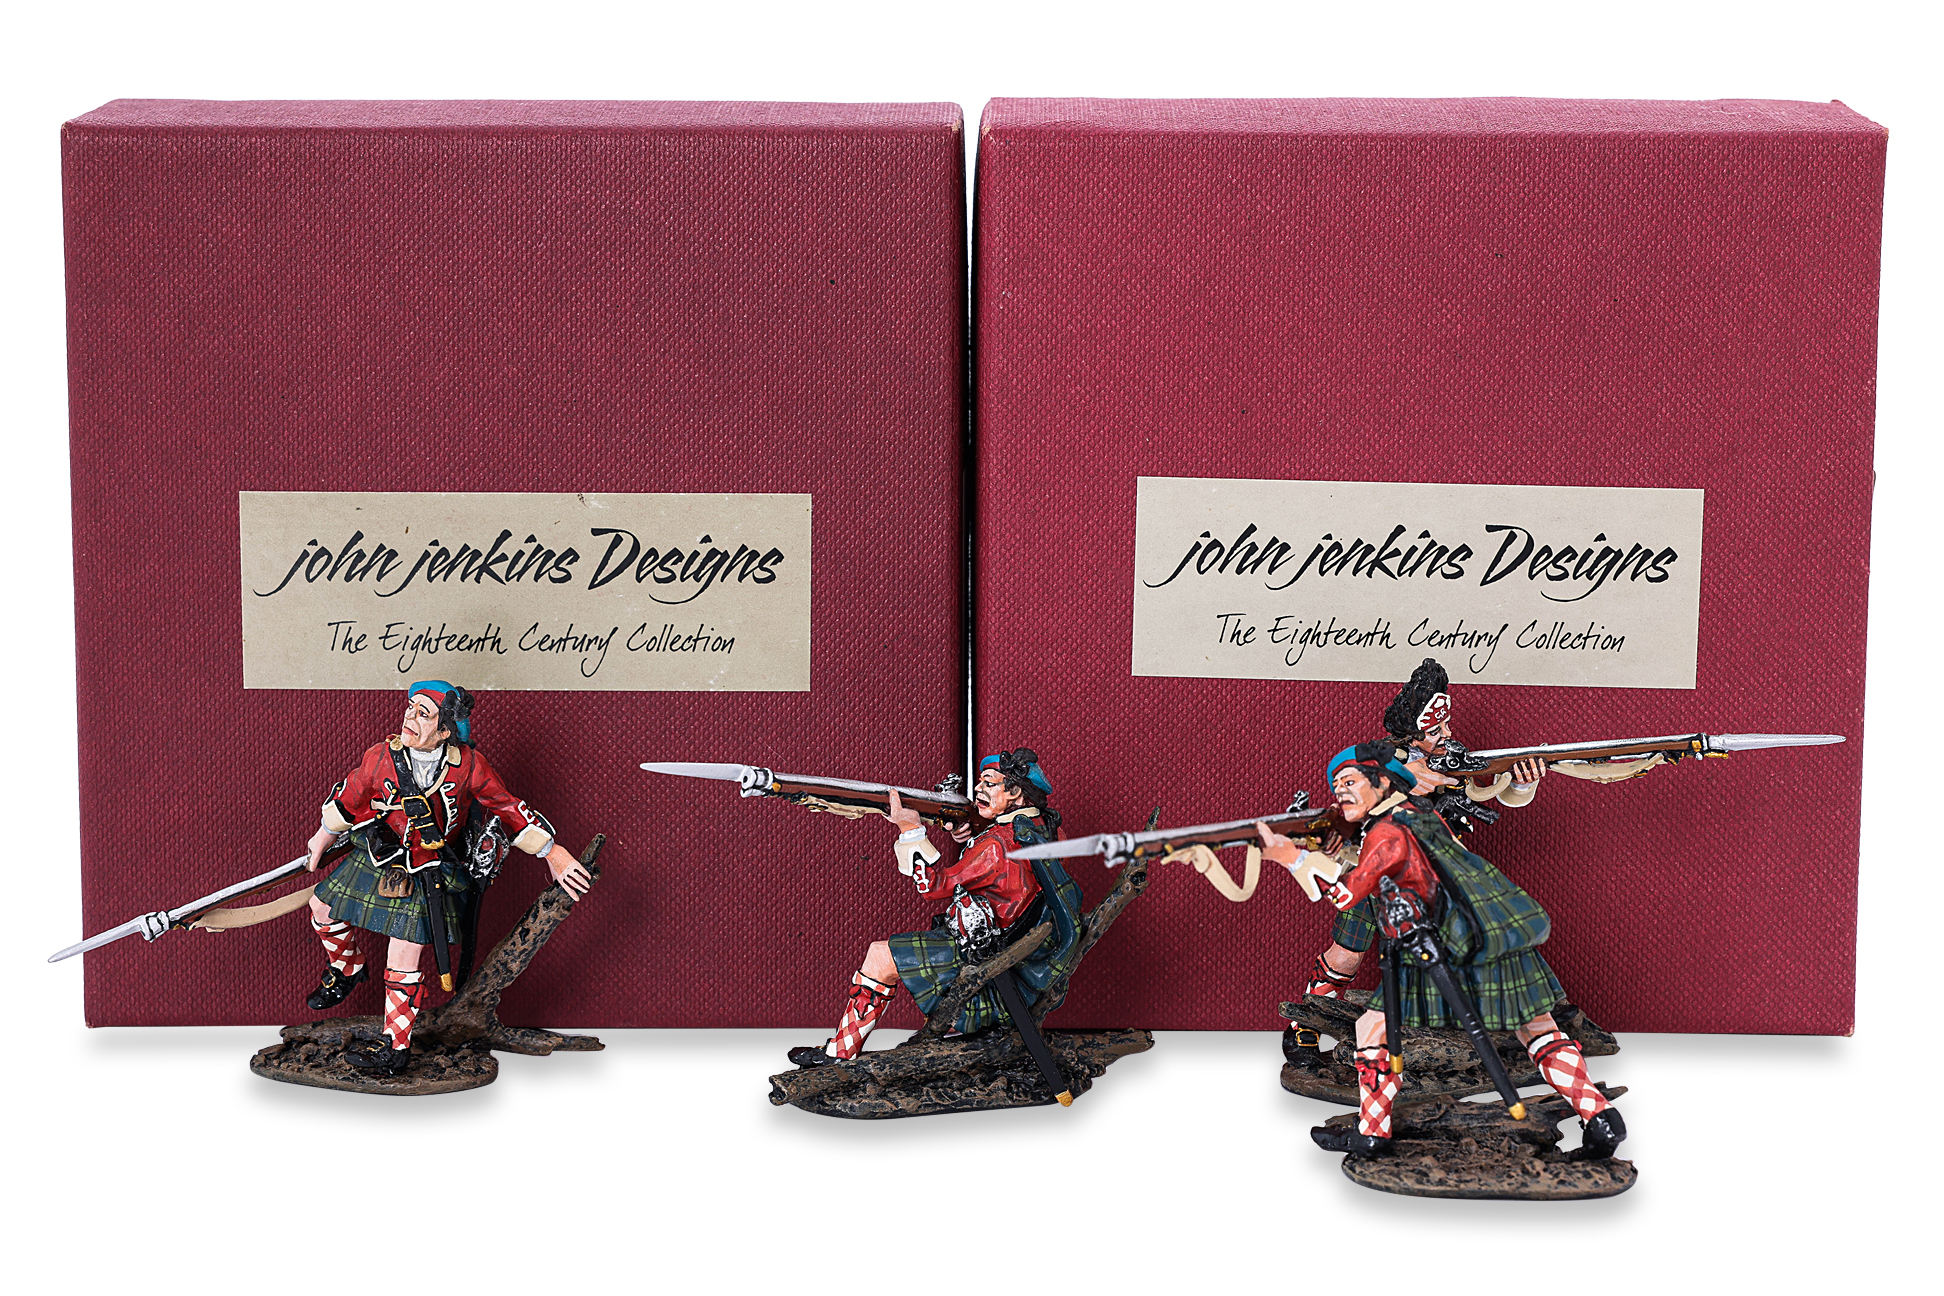 A GROUP OF 8 JOHN JENKINS DESIGNS TICONDEROGA MODEL SOLDIERS